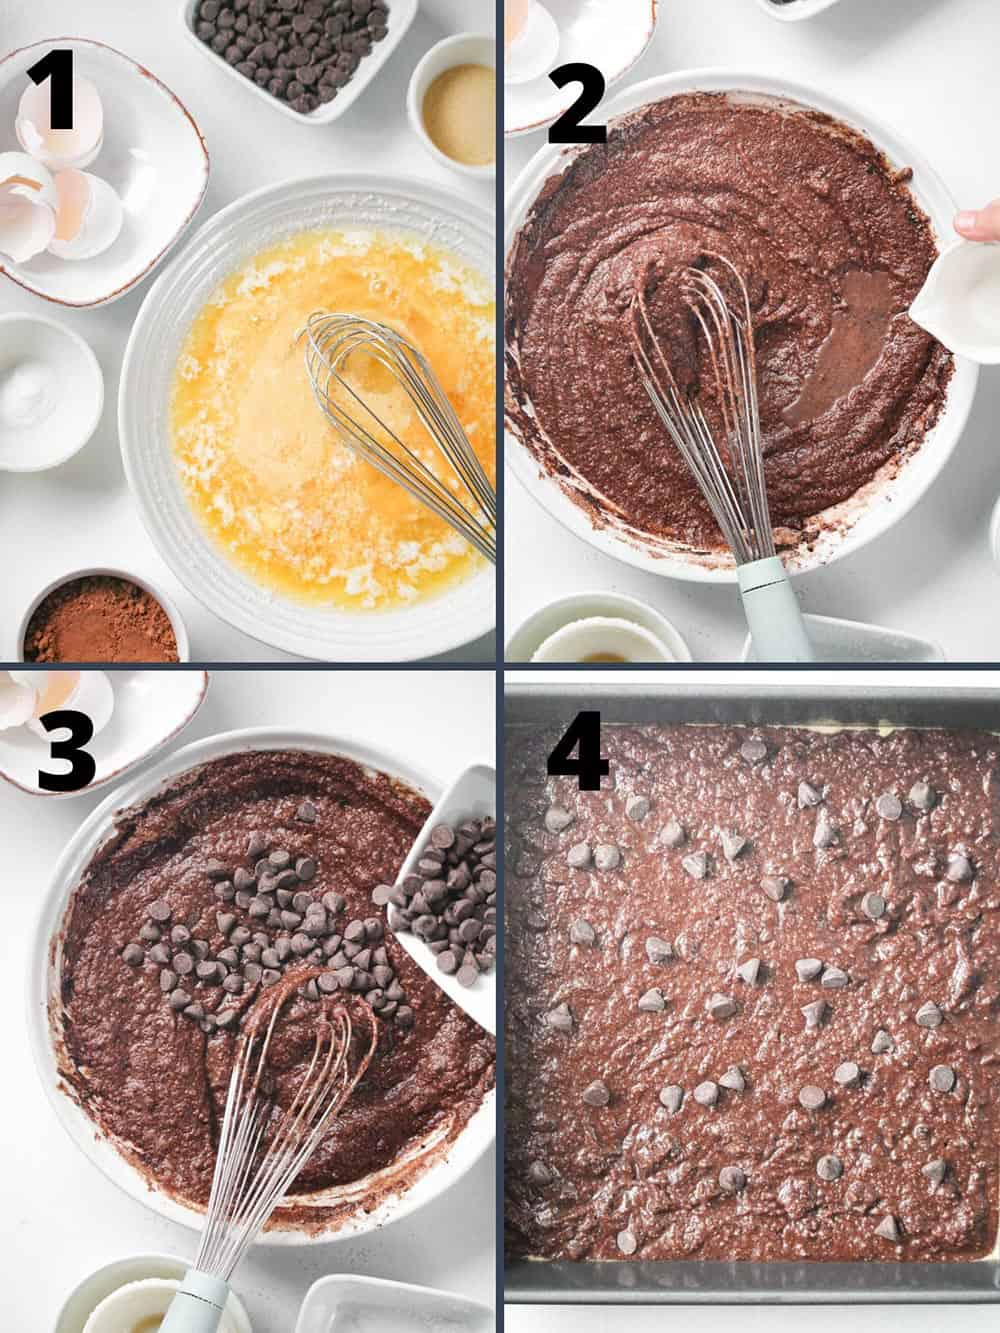 A collage of 4 images showing how to make keto brownies.